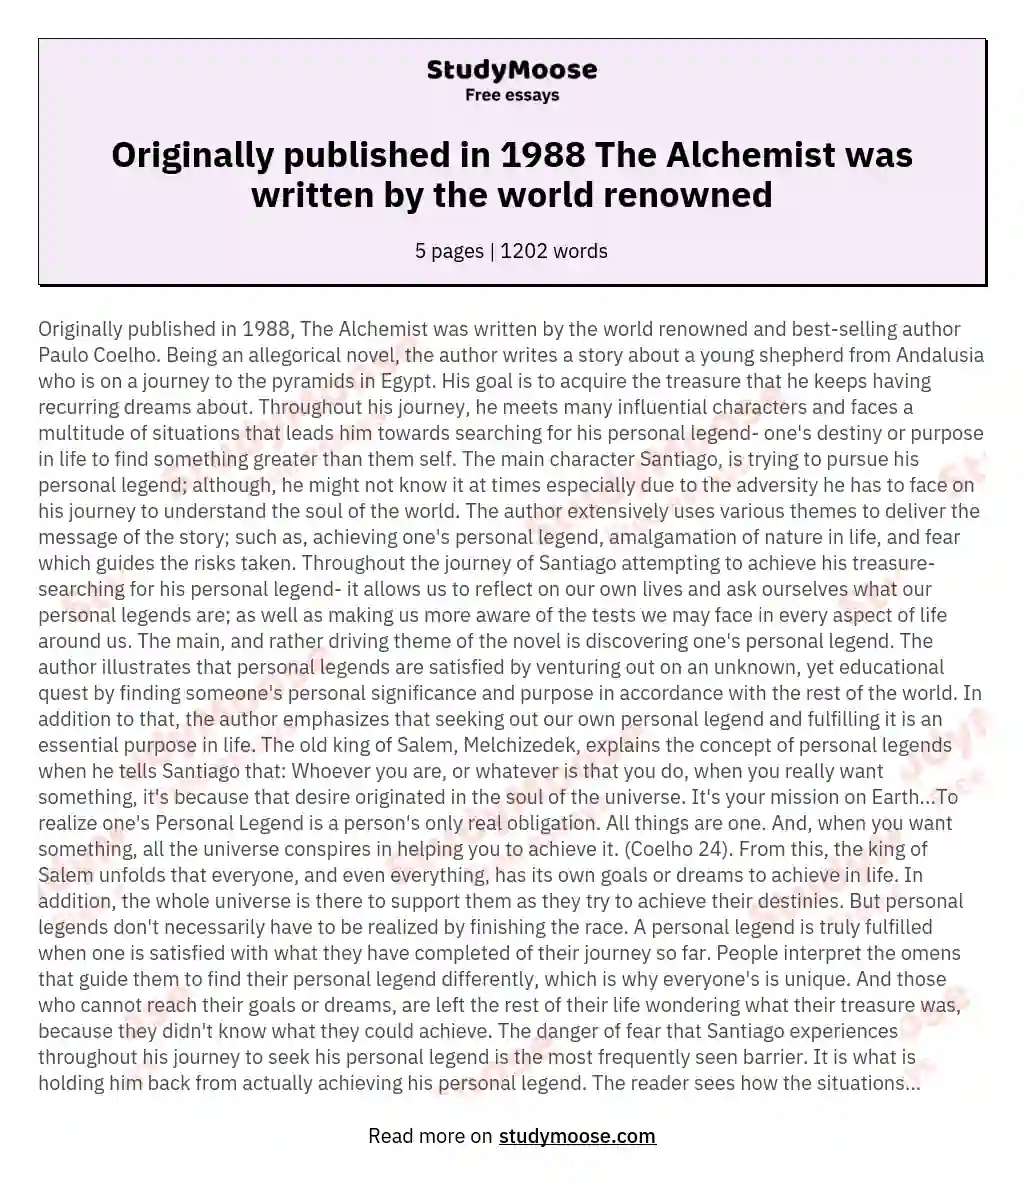 Originally published in 1988 The Alchemist was written by the world renowned essay